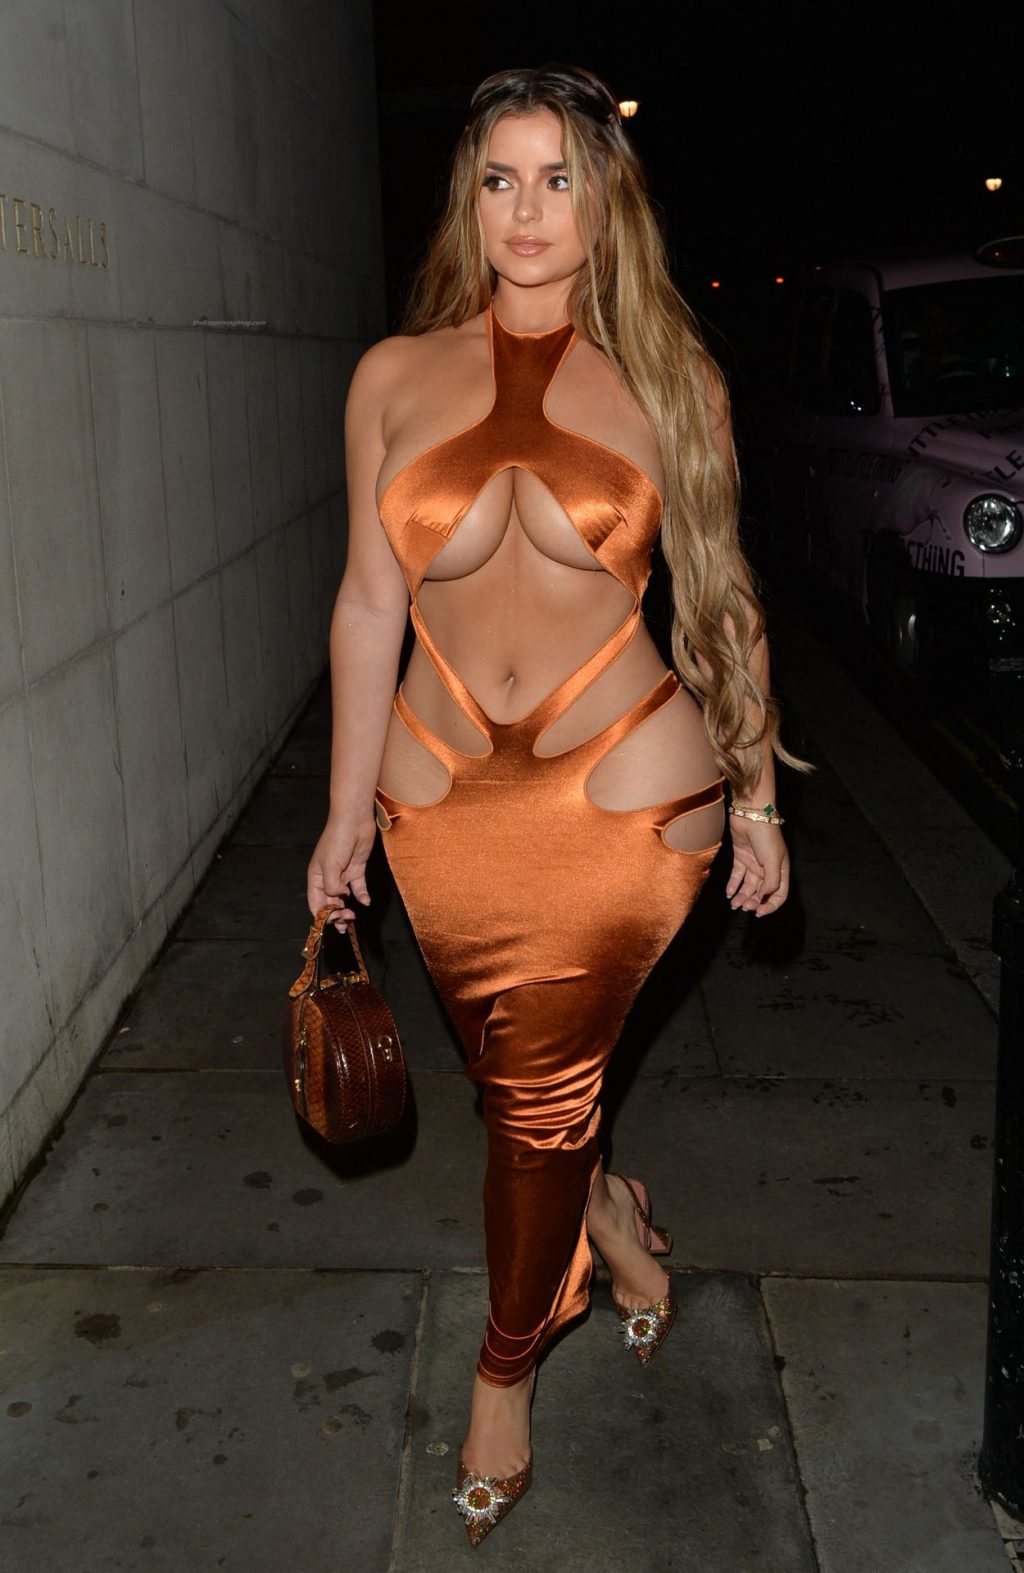 Demi Rose is Seen Arriving at Zuma London for the Launch Party of Her Latest Fashion Range (46 Photos)